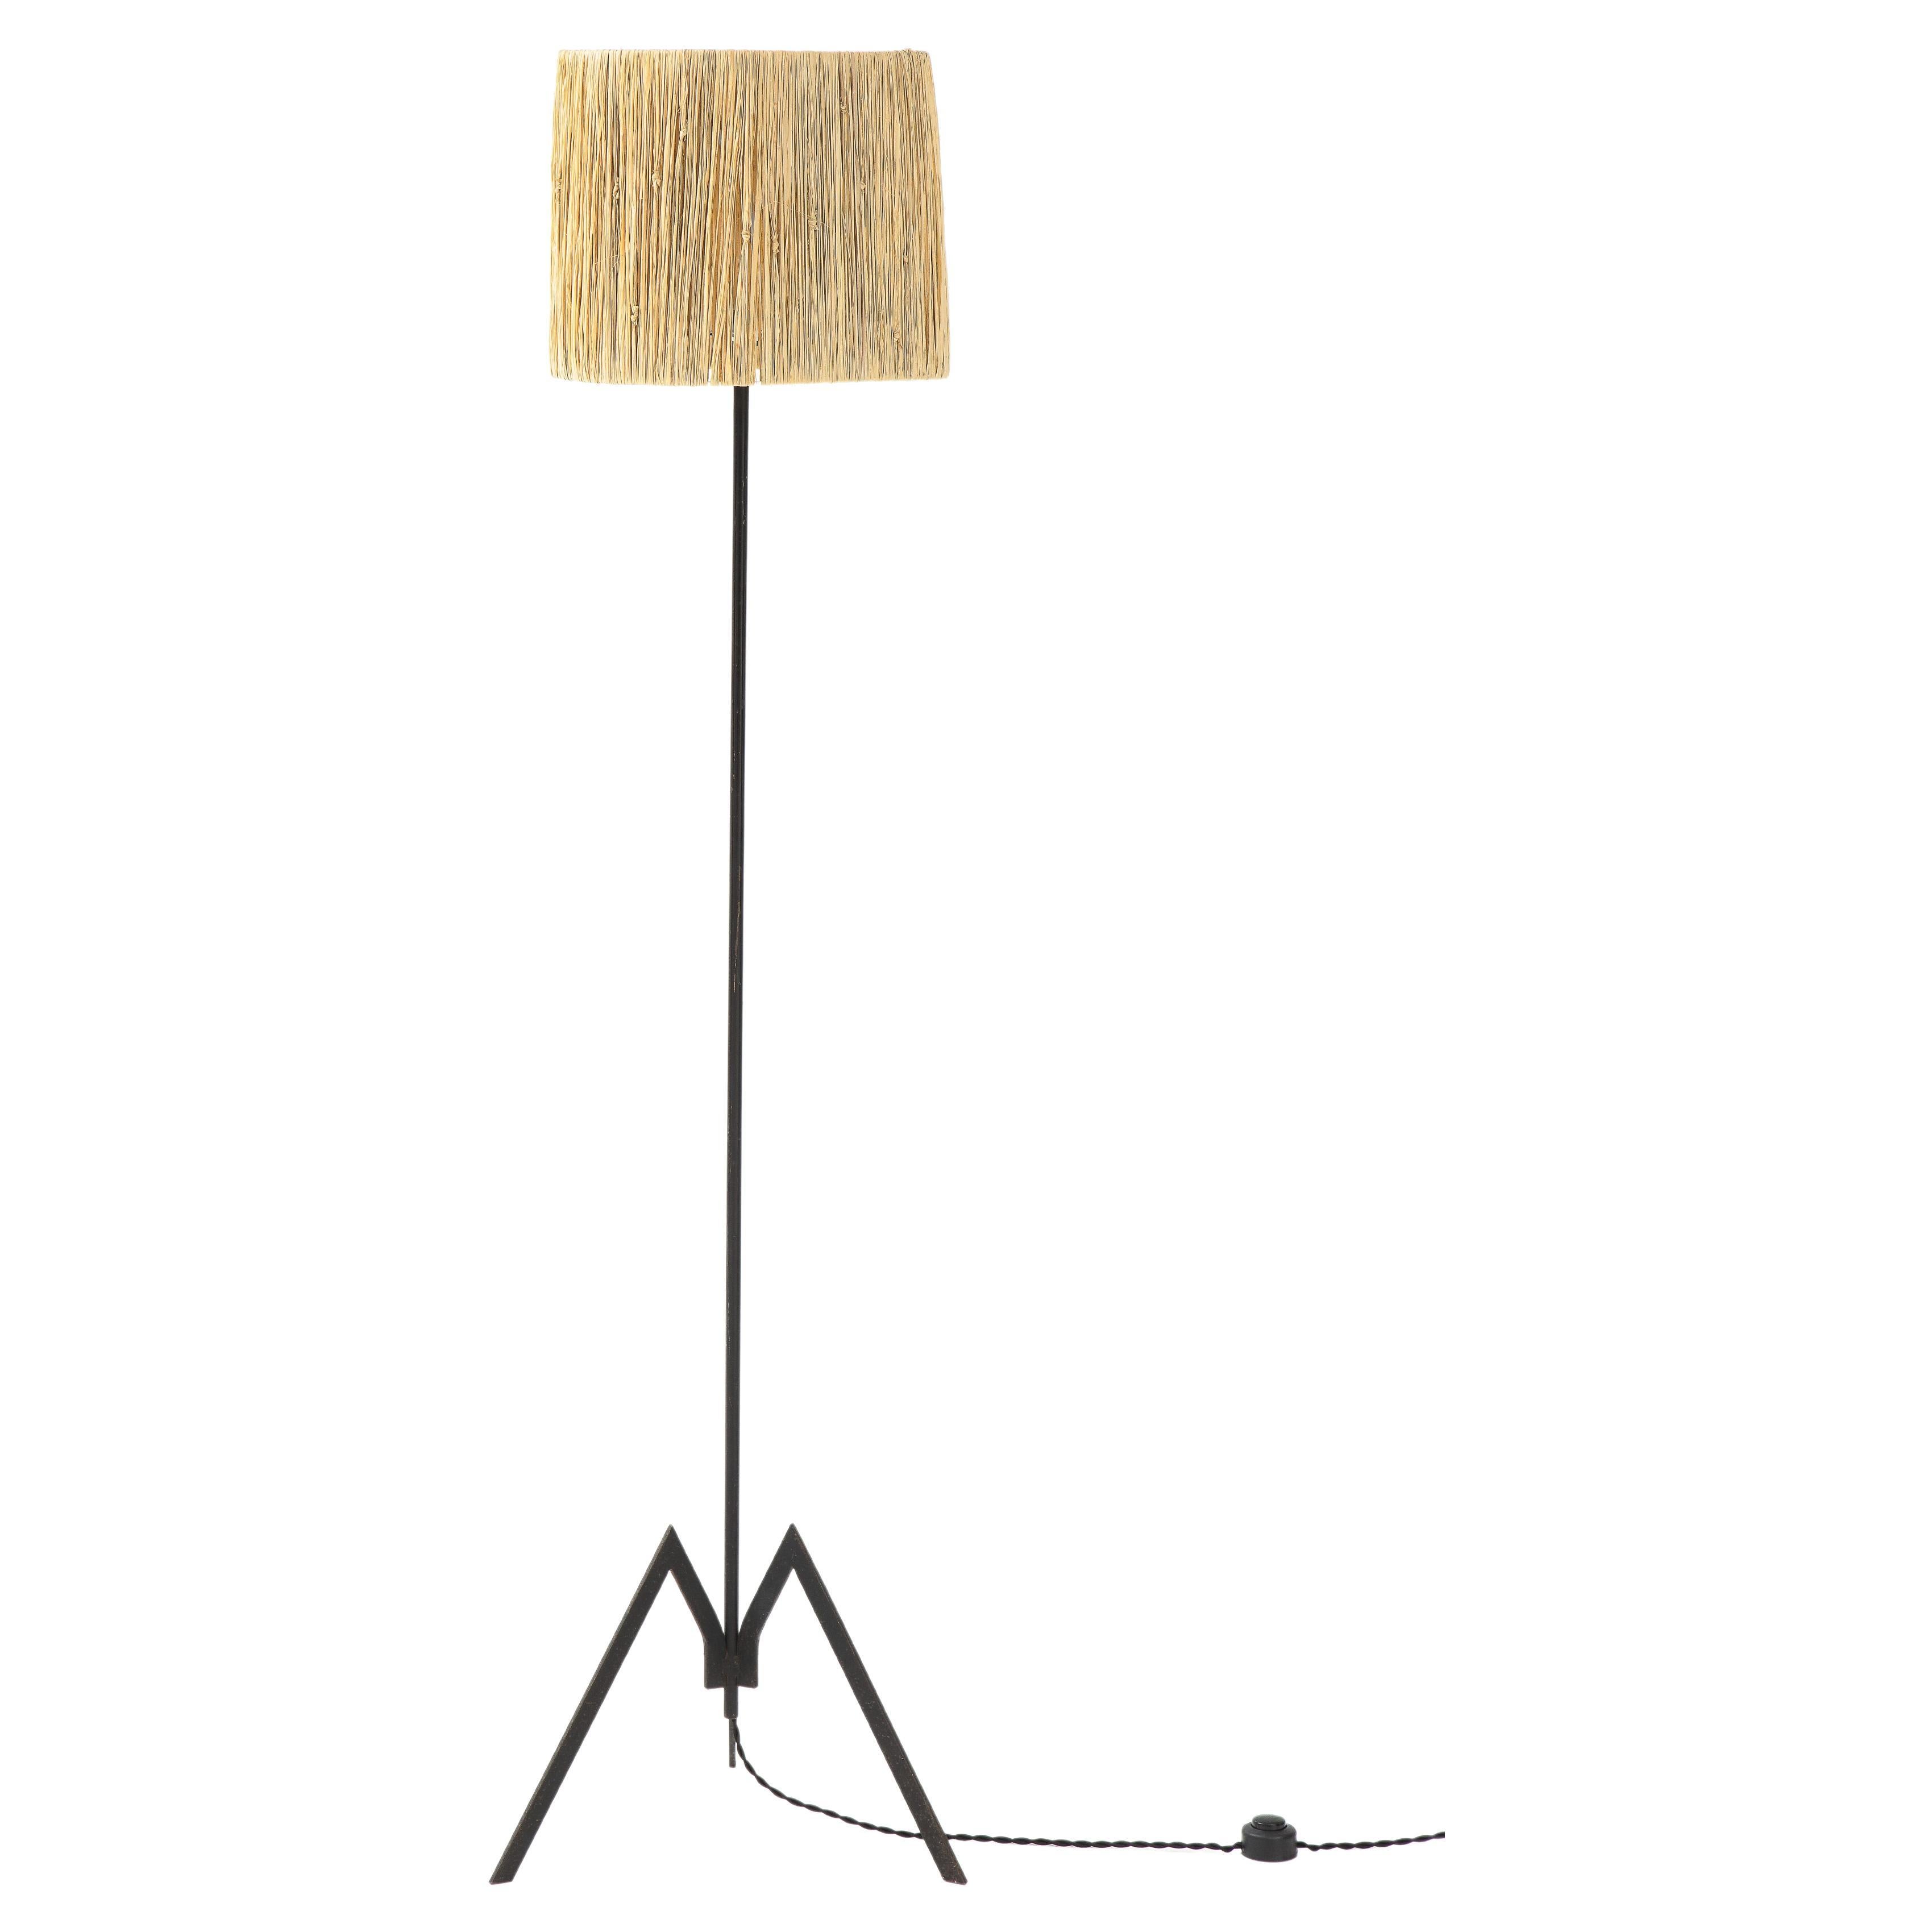 French Modernist Iron Floor Lamp with Raffia Shade, France, c. 1950's